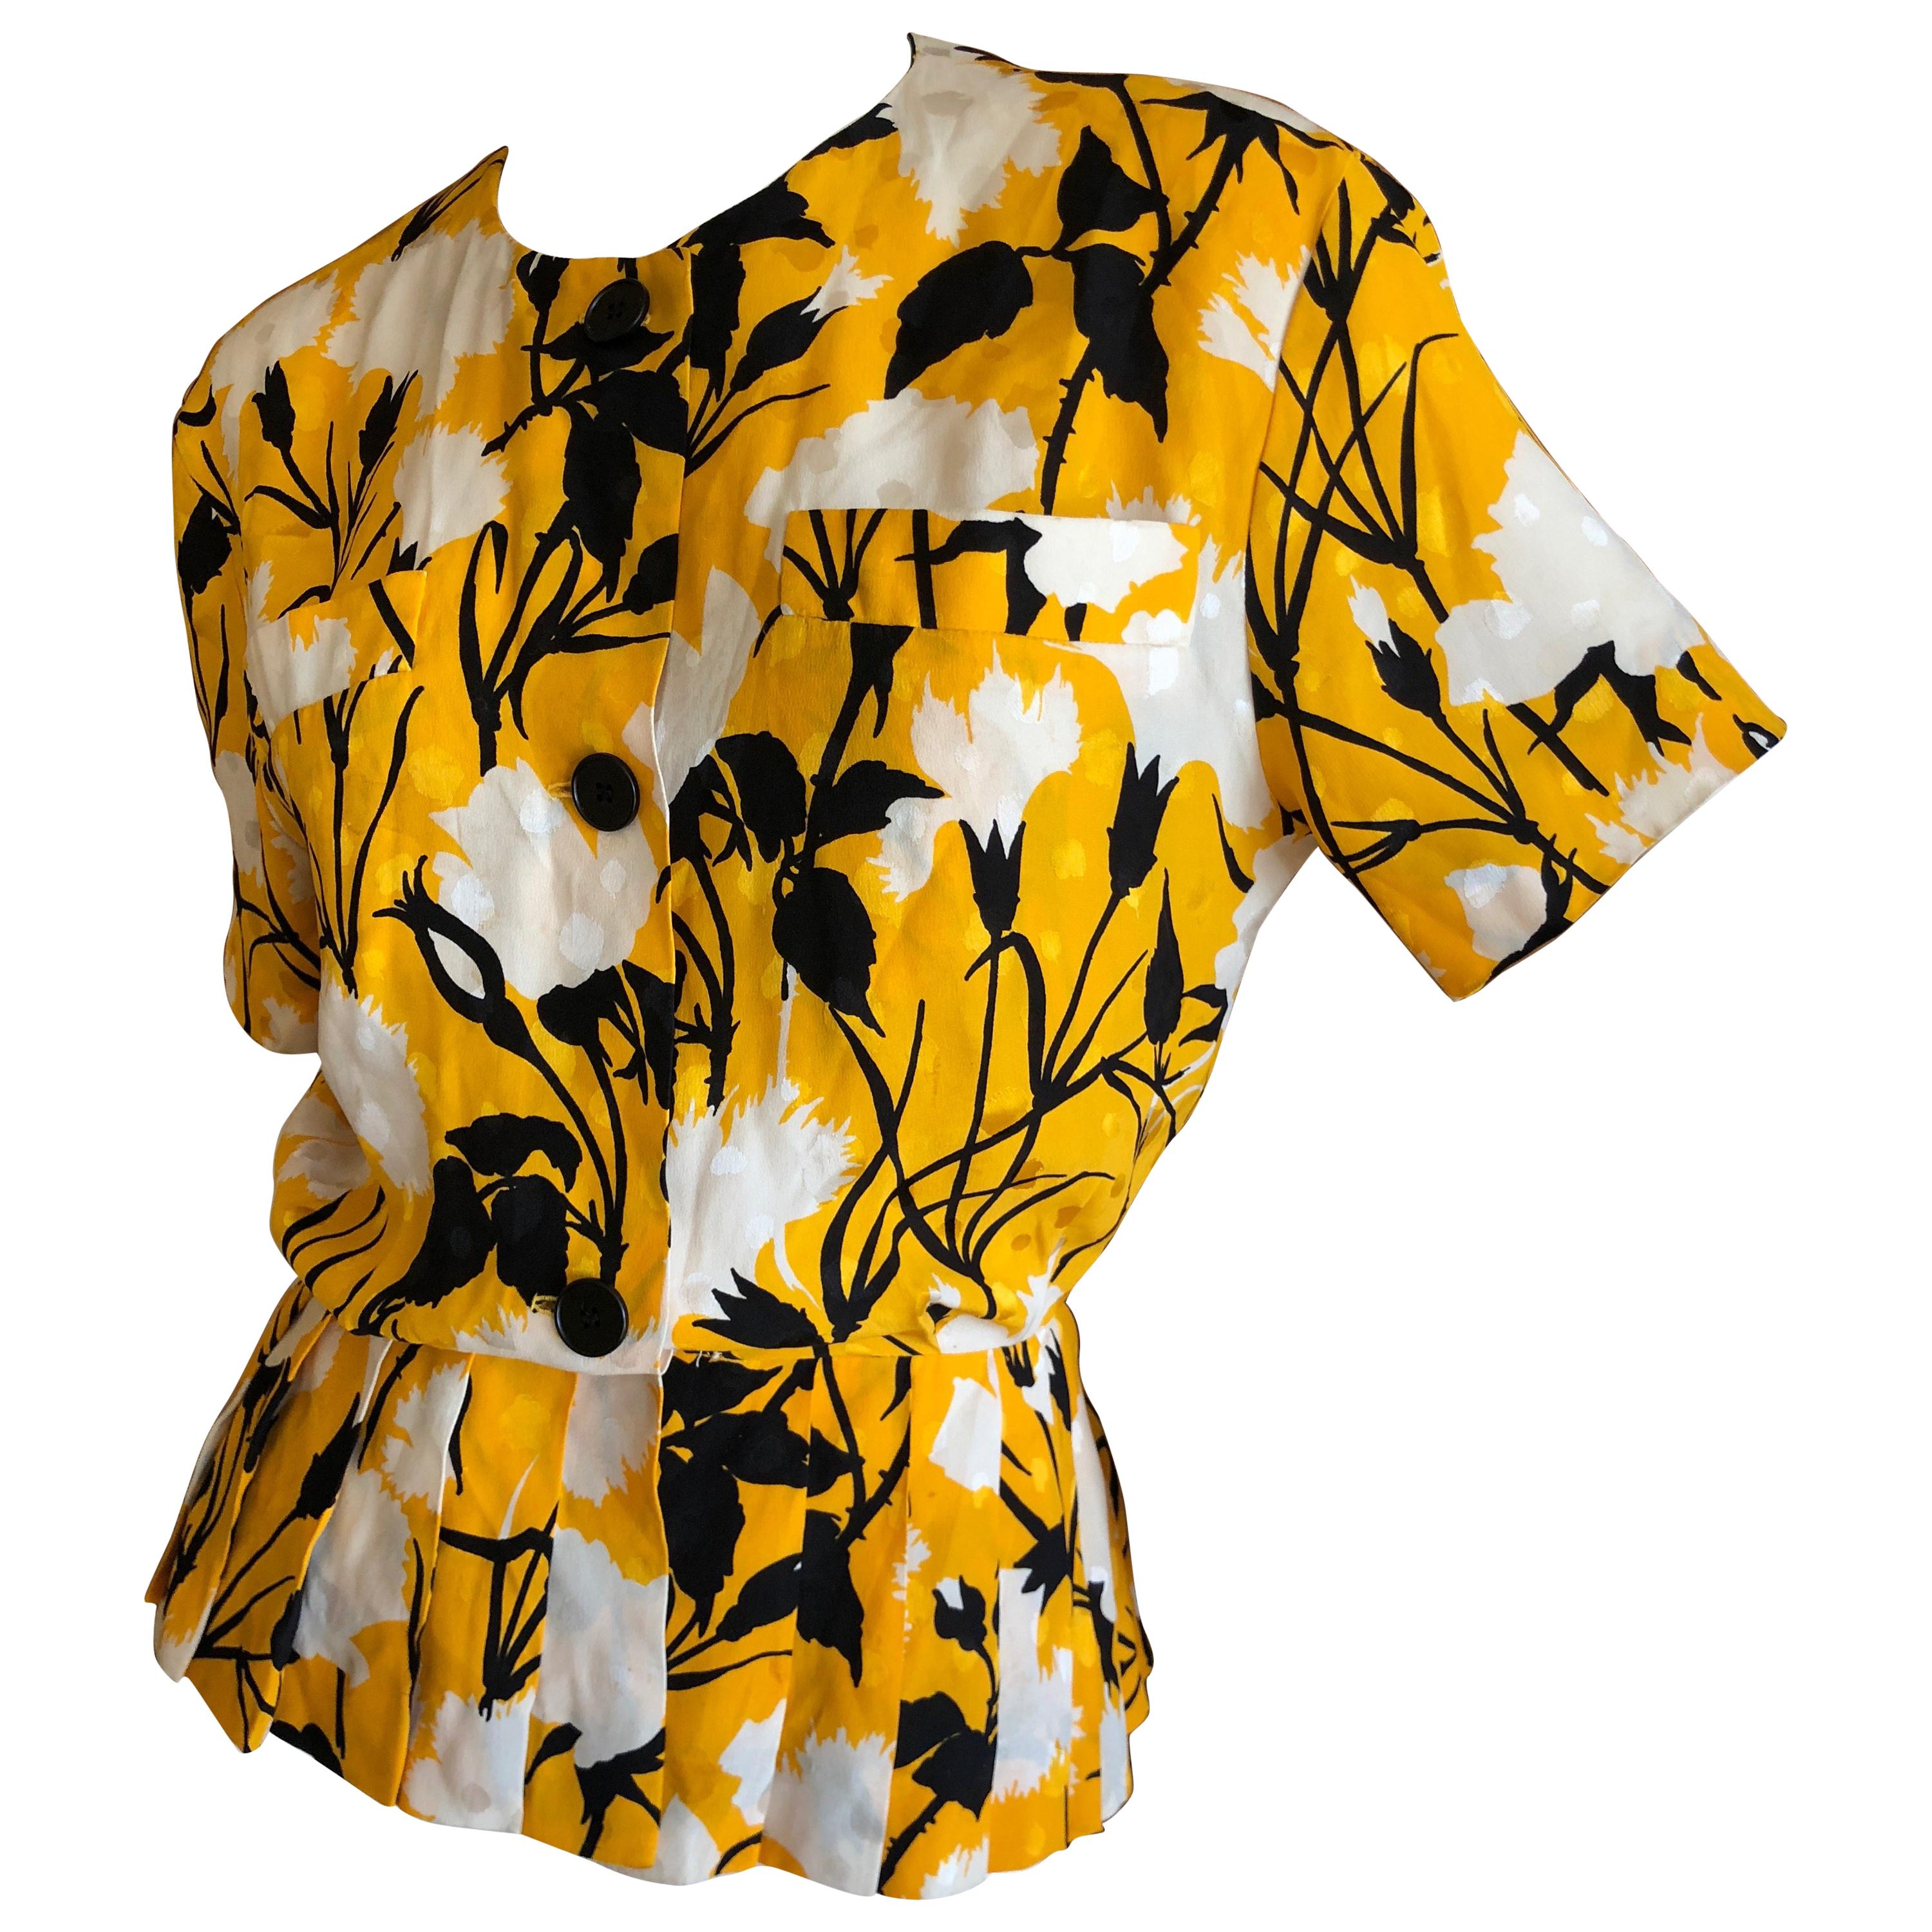 Christian Dior by Gianfranco Ferre Blossom Pattern Silk Top with Pleated Peplum For Sale